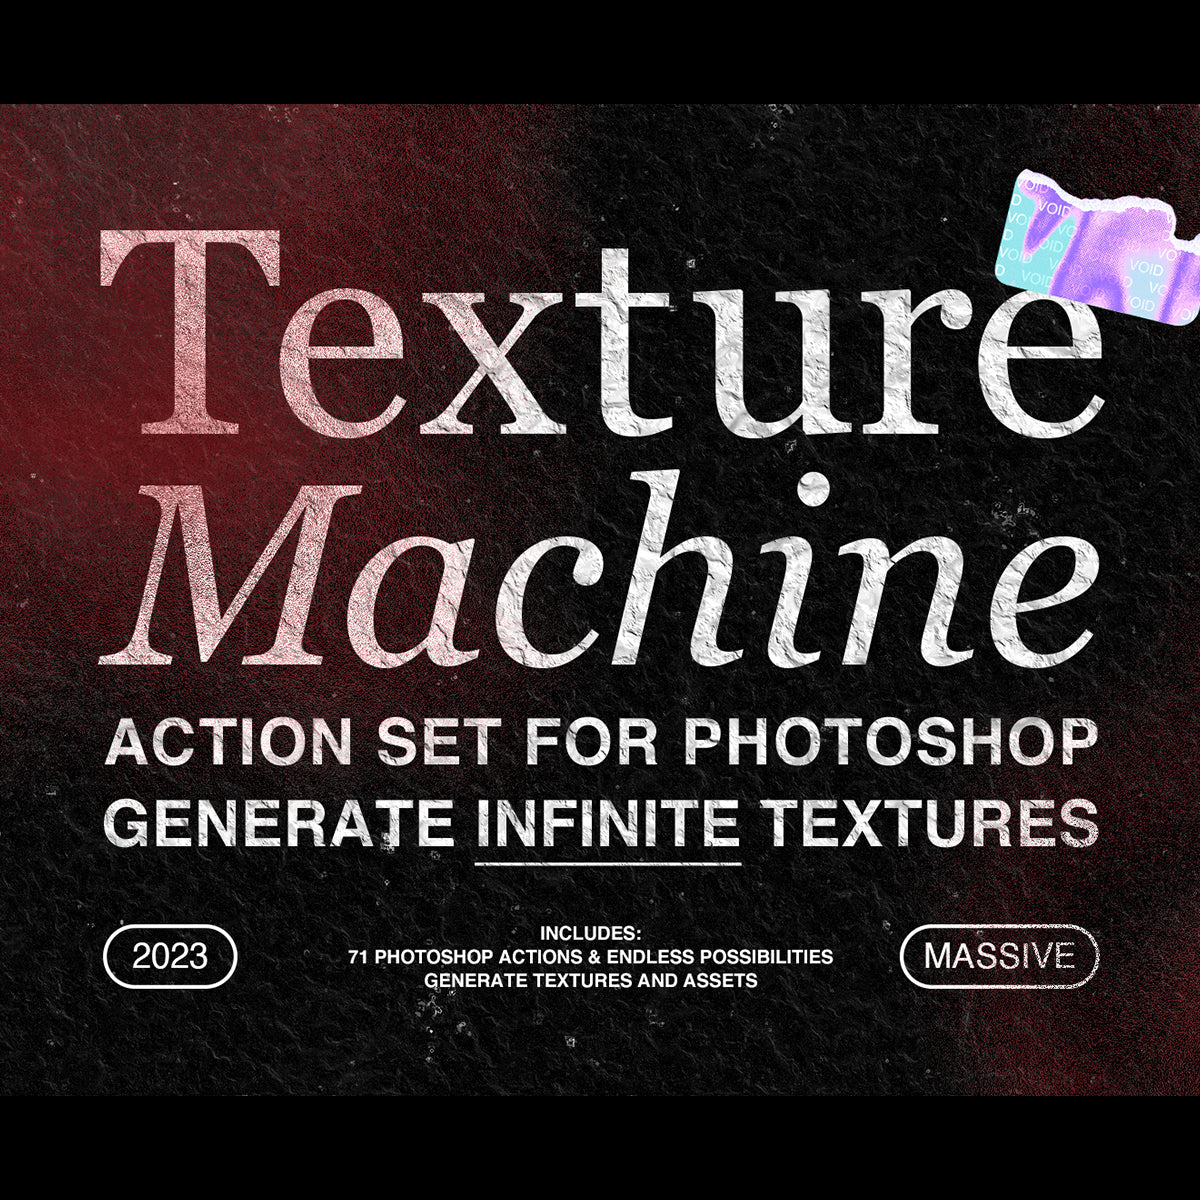 TEXTURE MACHINE - 71 Texture Generating Actions for Photoshop